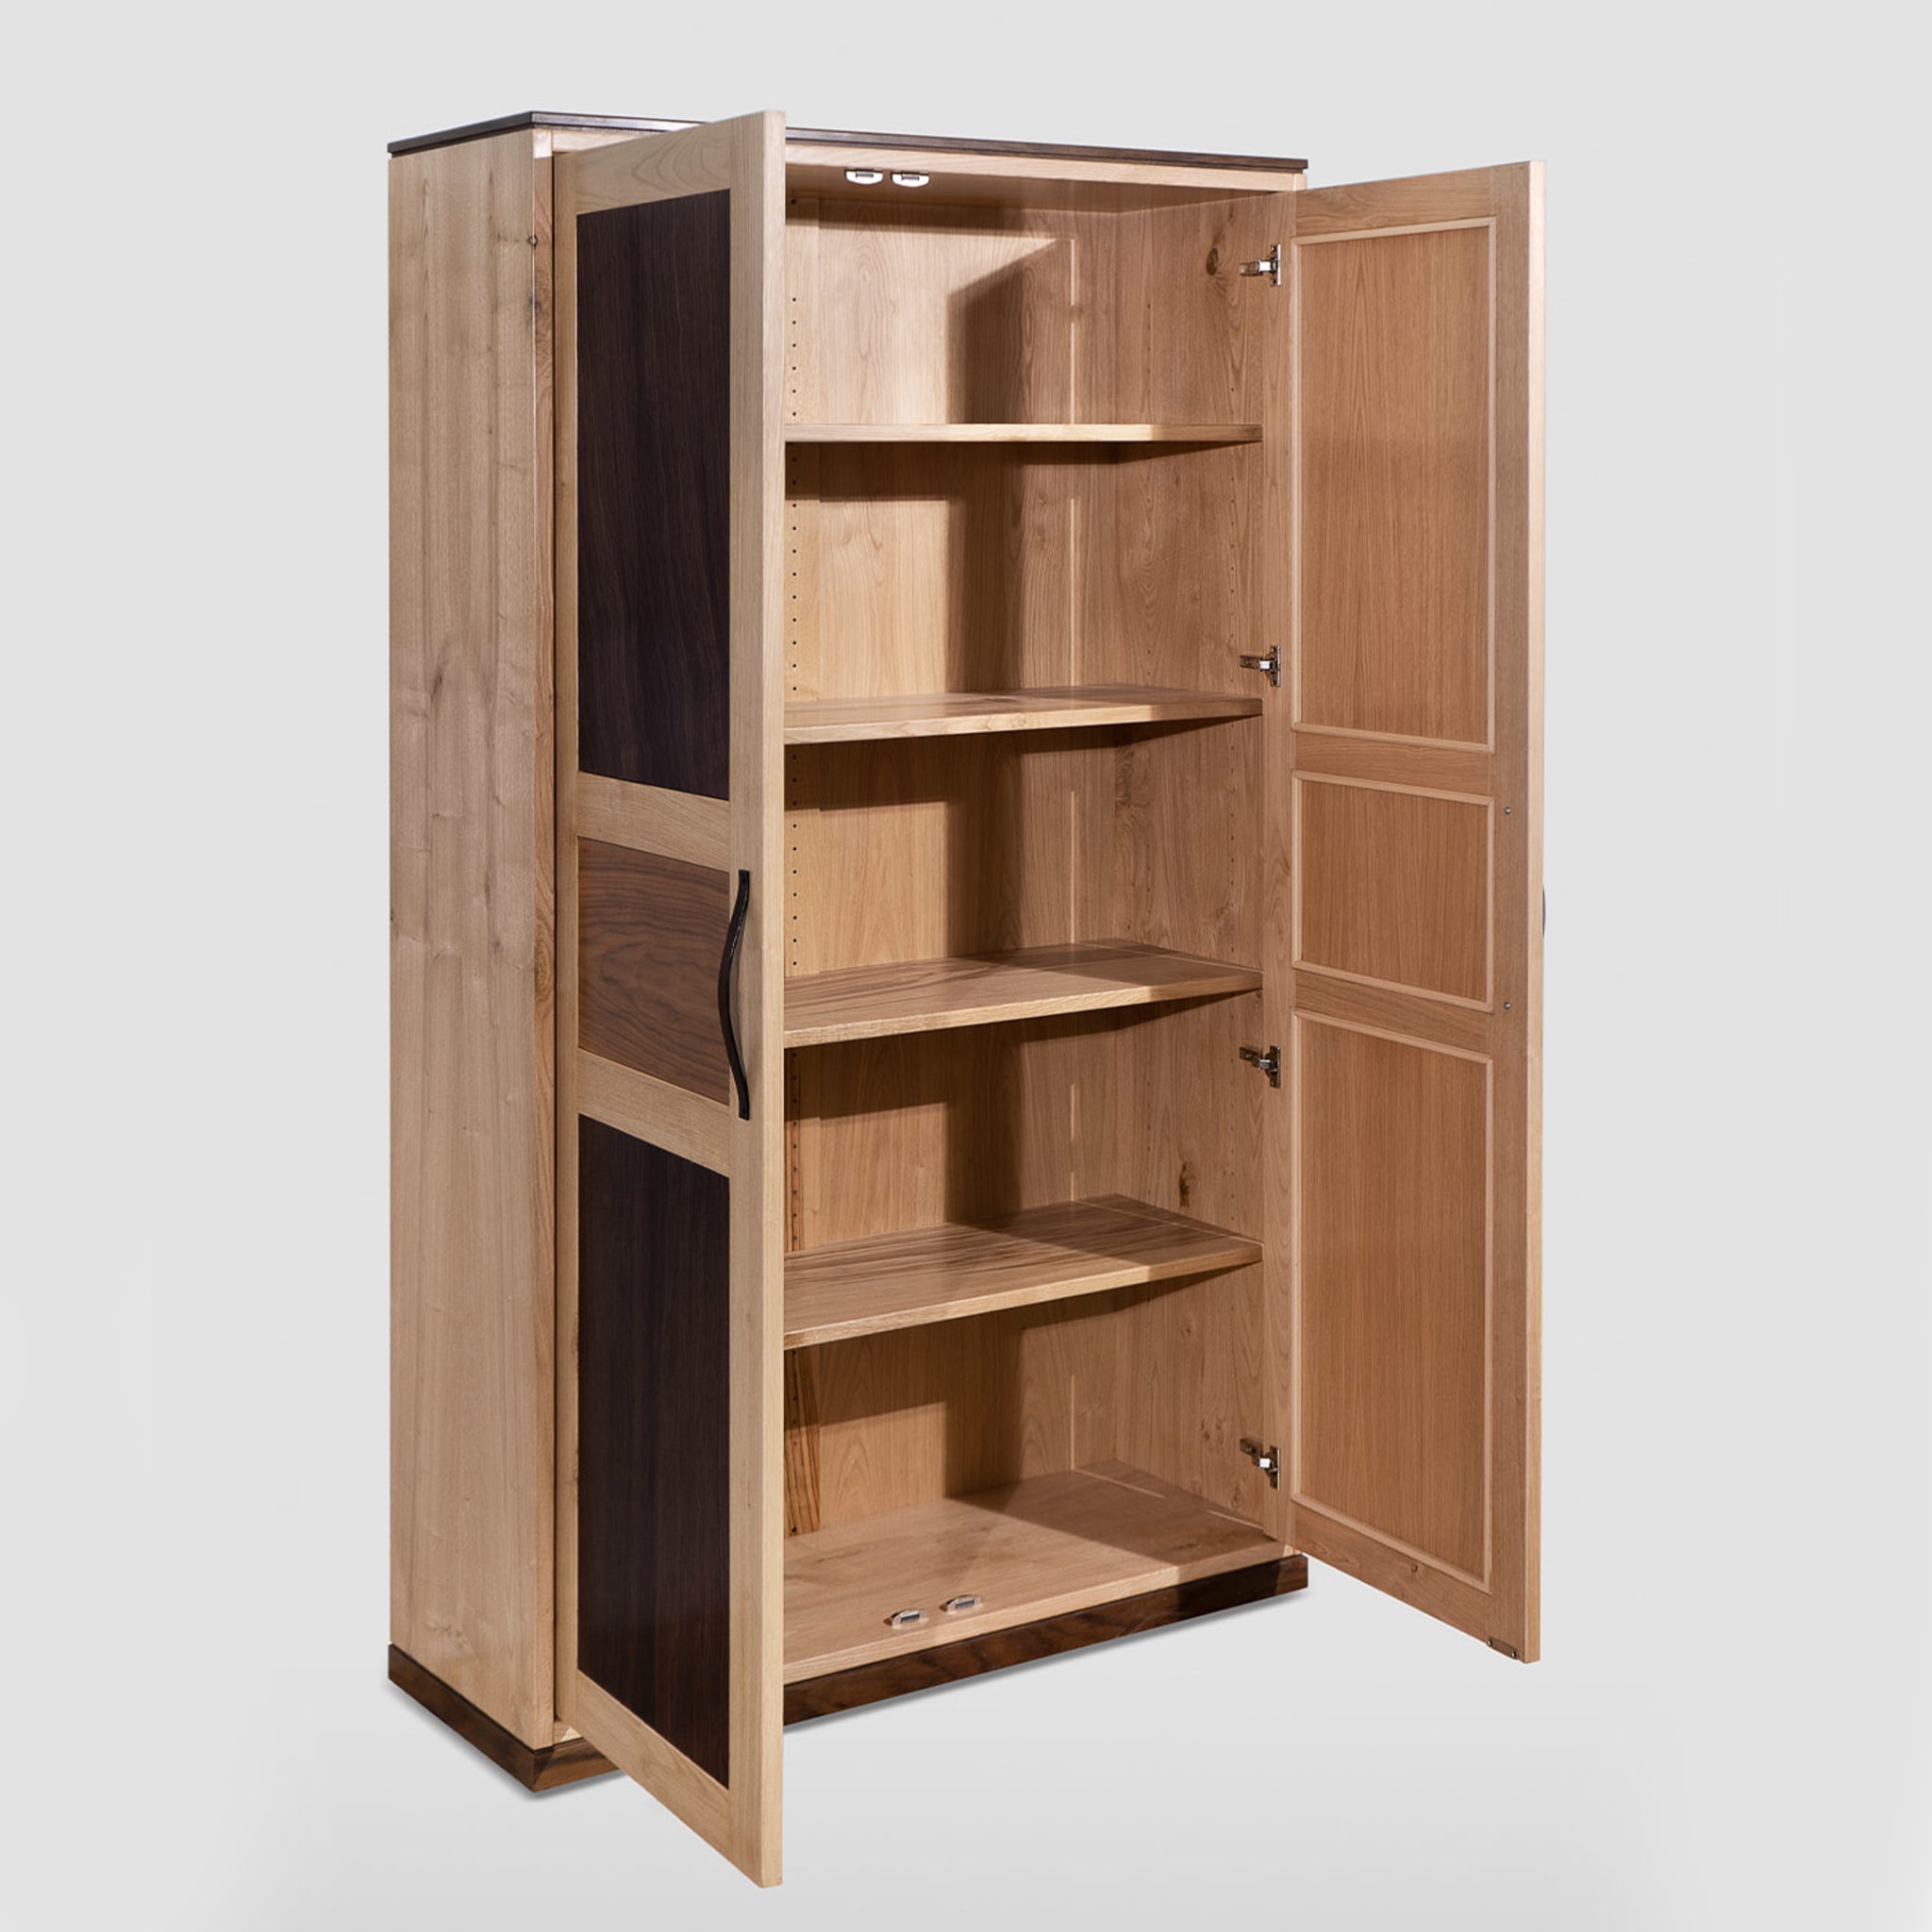 Mikael Two-Door Bookcase by Erika Gambella - Alternative view 3